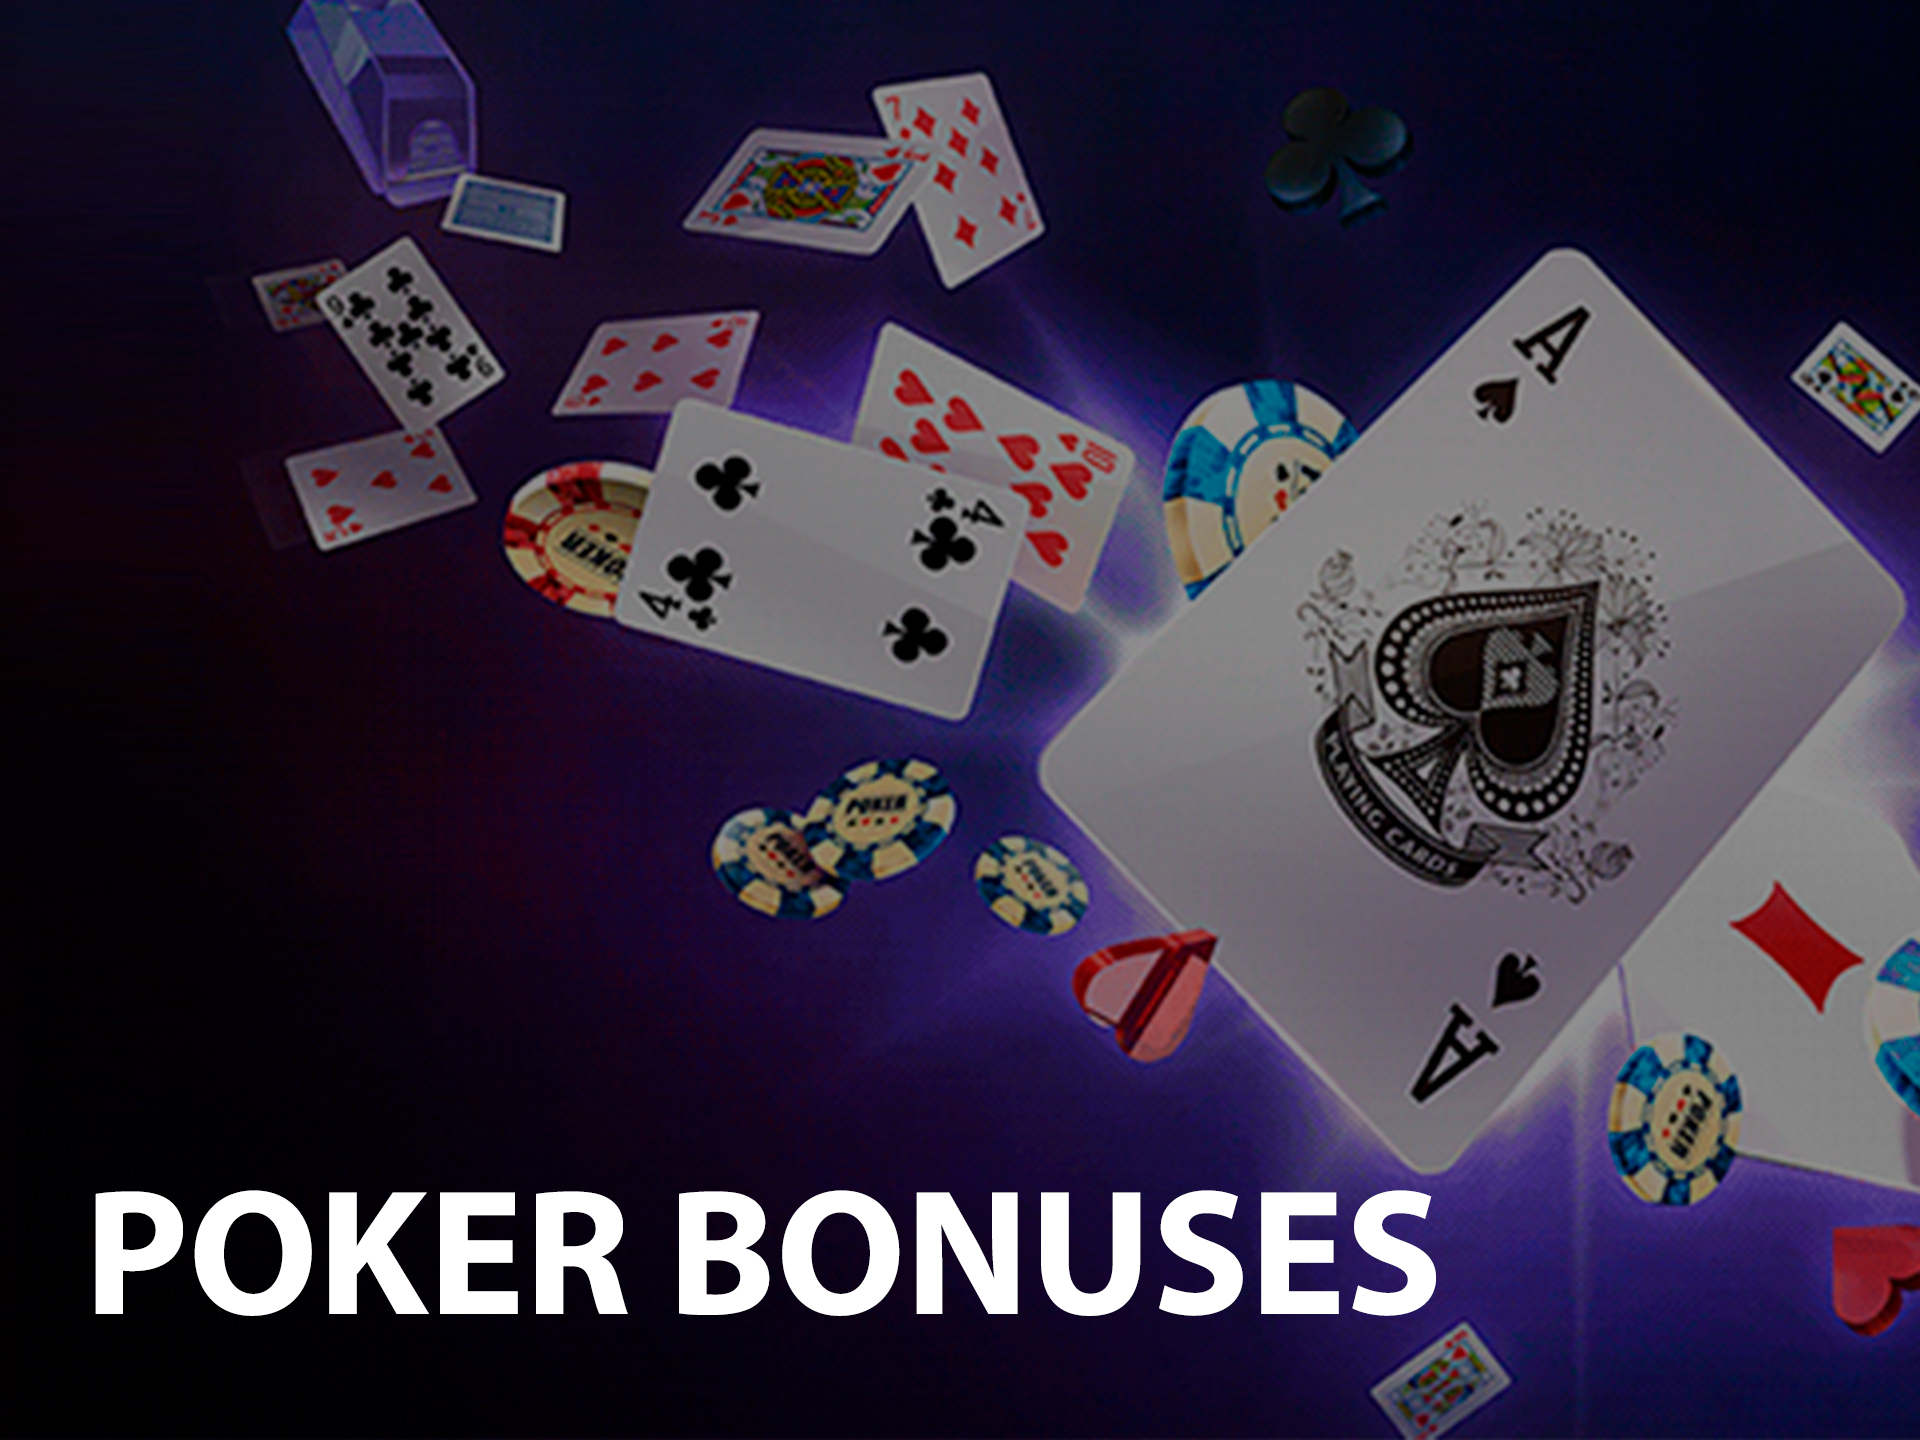 Poker lovers also will find some interesting bonuses for themselves in 1xbet.